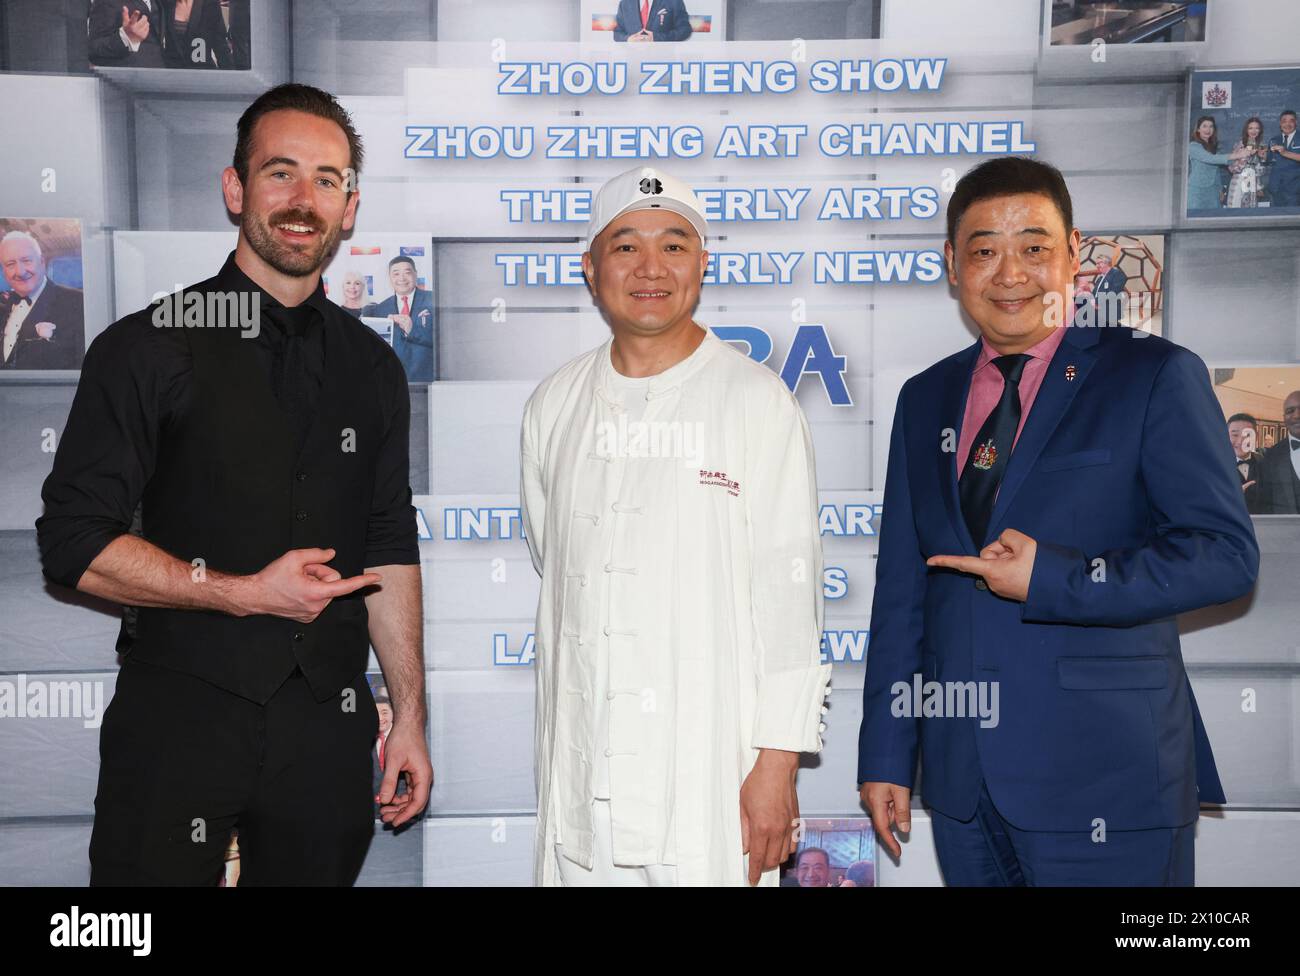 Beverly Hills, California, USA. 9th April, 2024. Actor/host Maxwell Gobbell, Chef Jack Hao of Pink Moon Restaurant, and TV host Joey Zhou, founder of the Los Angeles Beverly Arts (LABA), attending a LABA interview at Pink Moon Restaurant in Beverly Hills, California. Credit: Sheri Determan Stock Photo